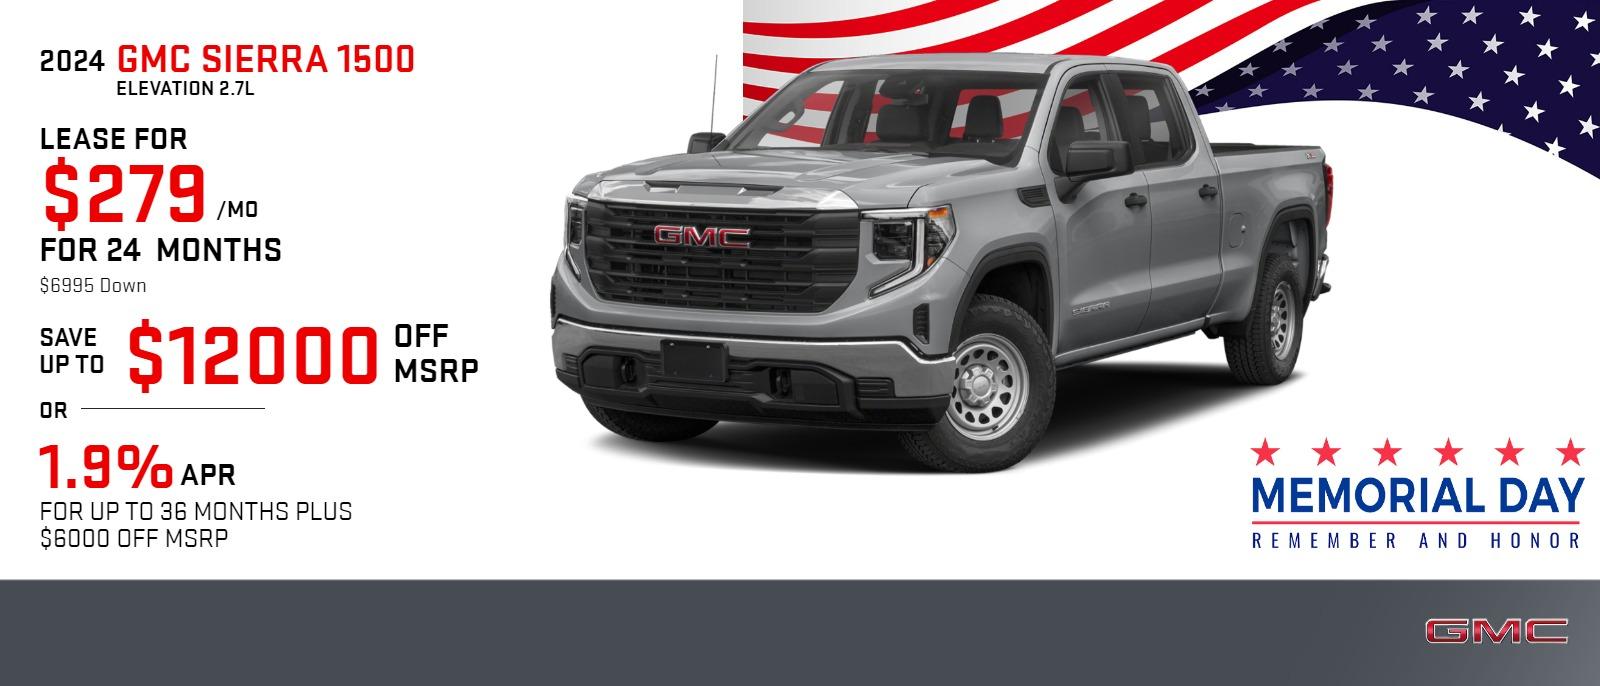 2024 SIERRA 1500 ELEVATION 2.7L
$279 | 24 MONTHS | 6995
SAVE UP TO $12000 OFF MSRP
1.9% APR FINANCING FOR UP TO 36 MONTHS PLUS $6000 OFF MSRP